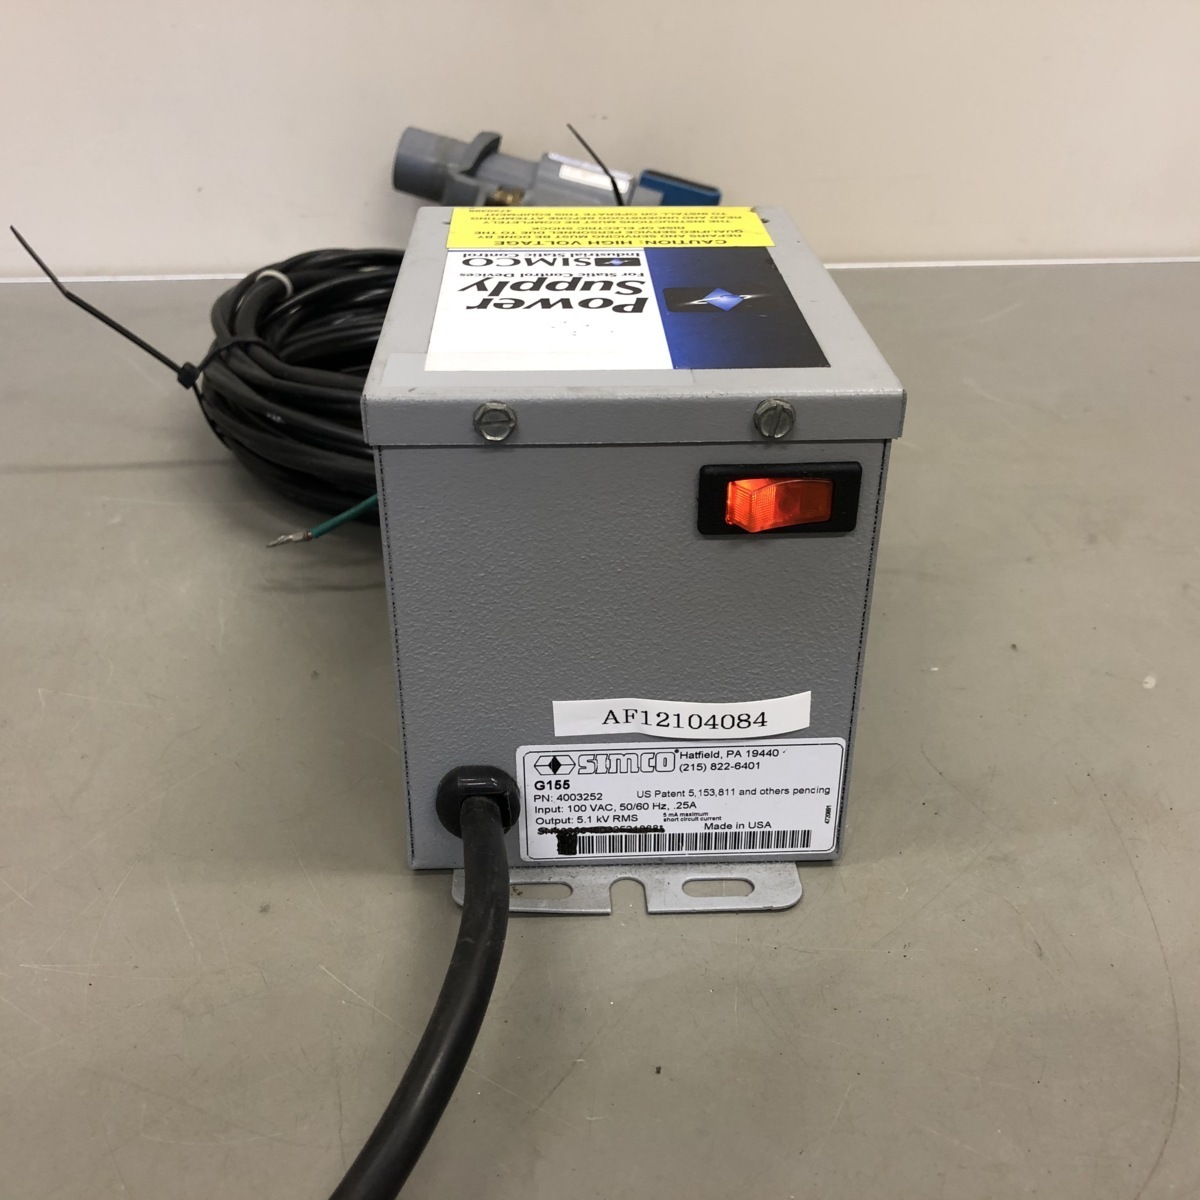 SIMCO Industrial Static Control Power Supply G165 4002996 for sale online 